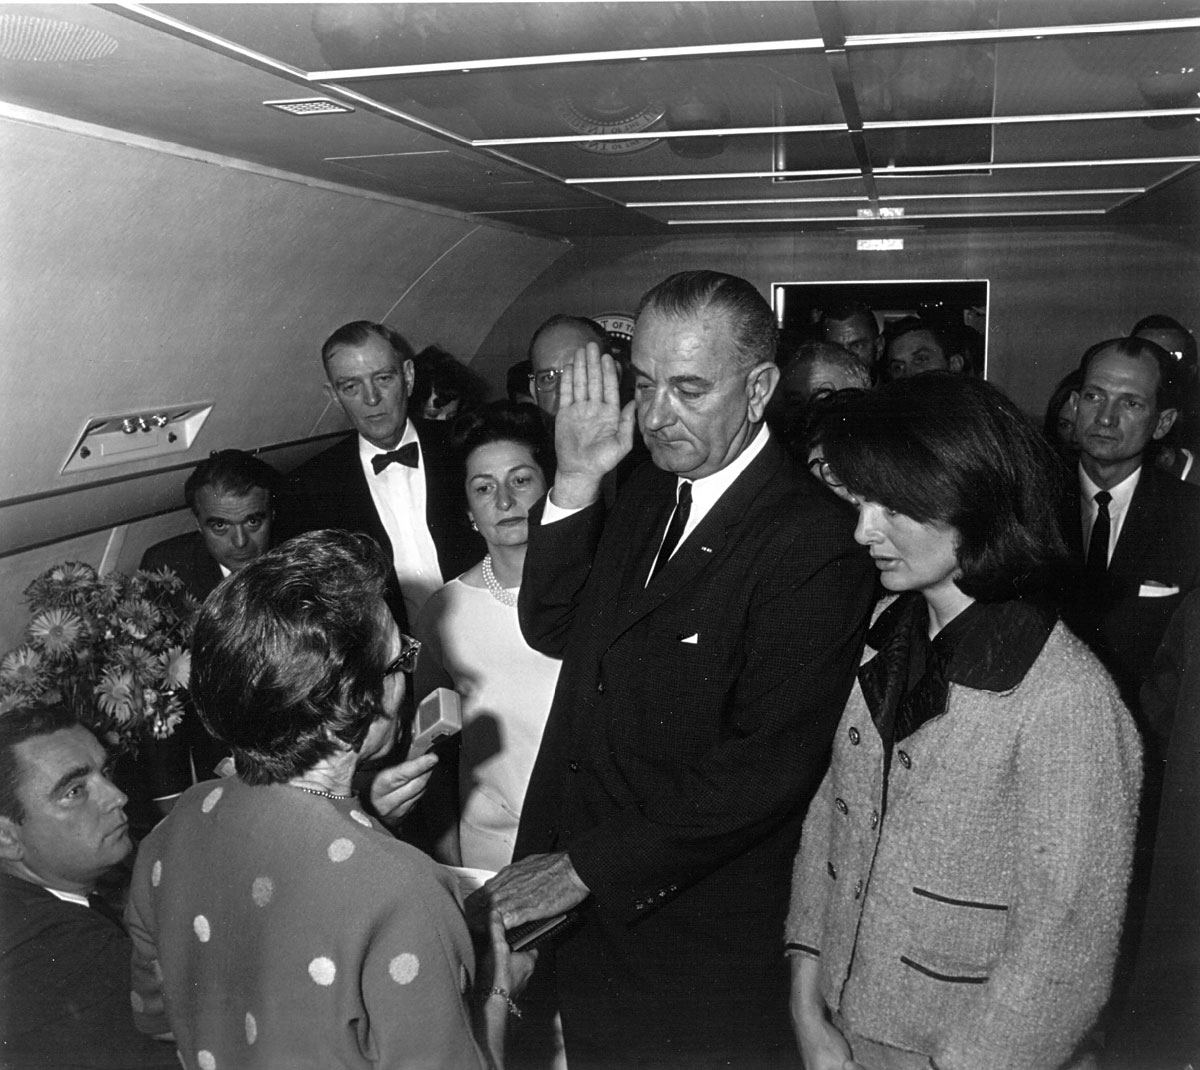  Lyndon B. Johnson takes the oath of office as President of the United States, after the assassination of President John F. Kennedy November 22, 1963. (Photo by National Archive/Newsmakers)